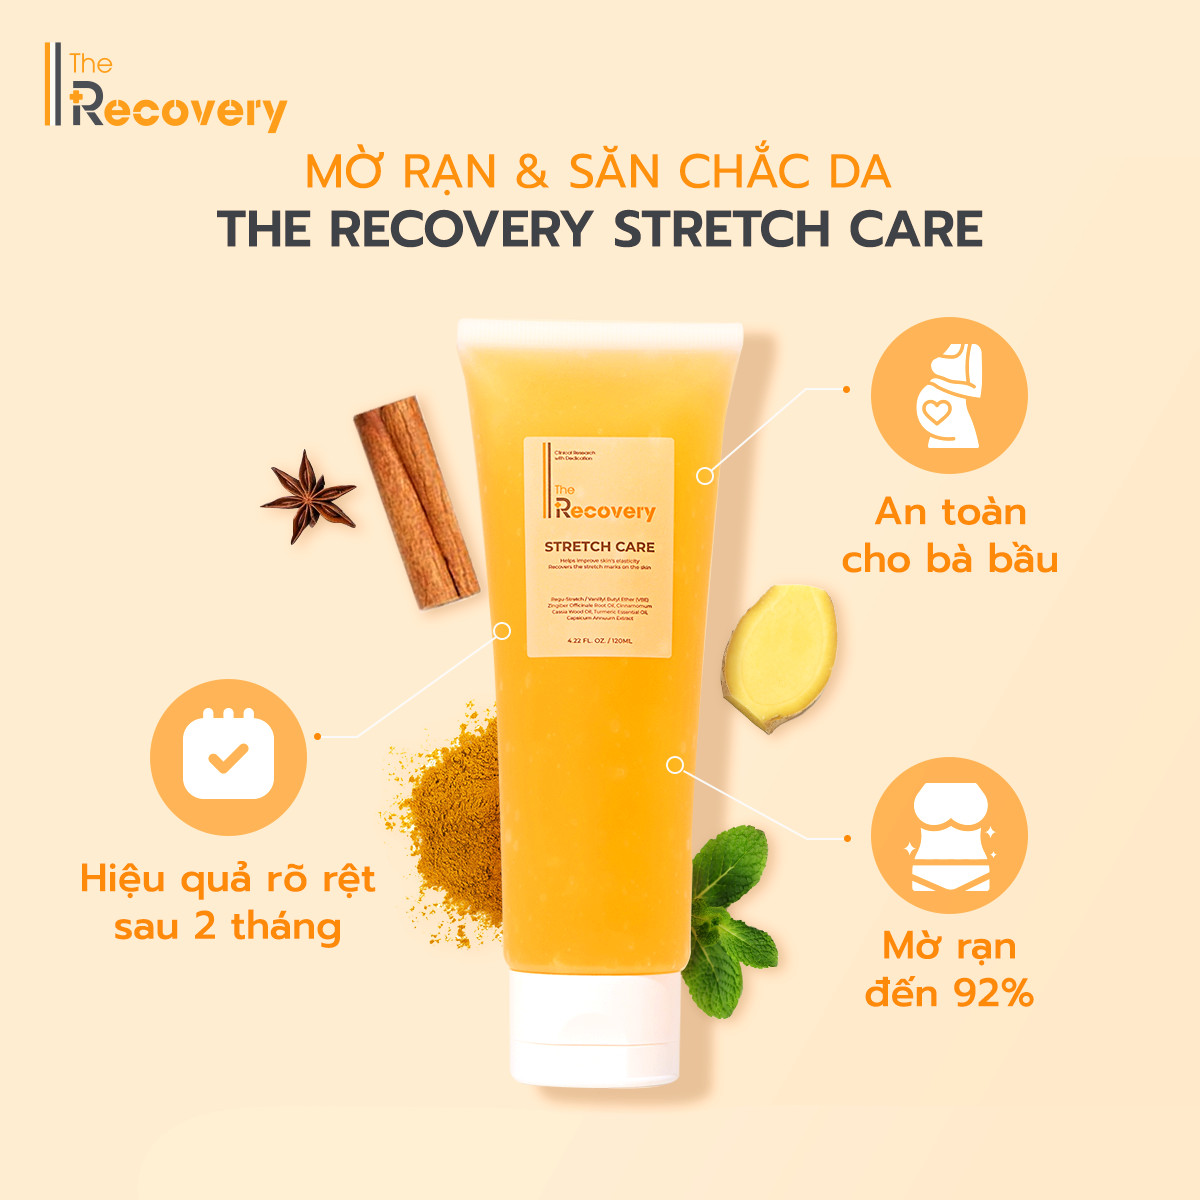 The Recovery Stretch Care